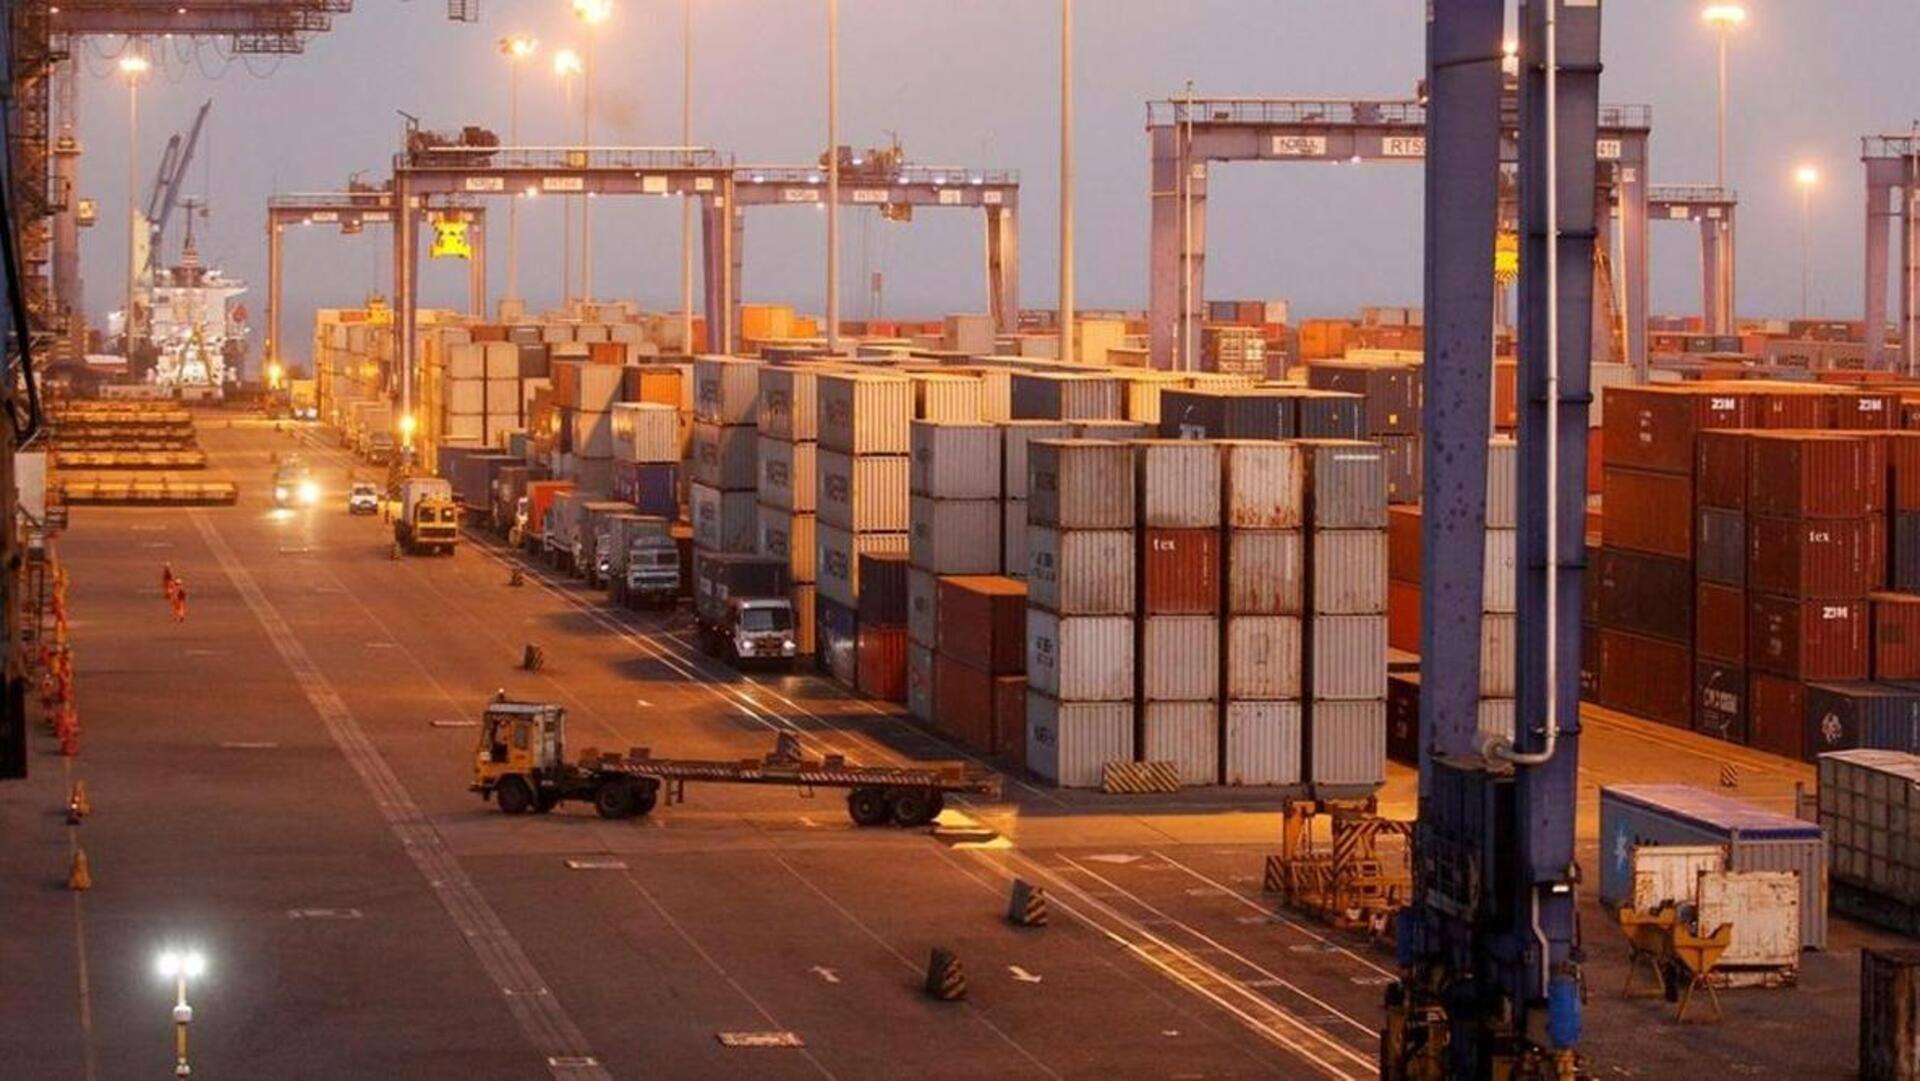 India's trade deficit shrinks to $24.16 billion in August